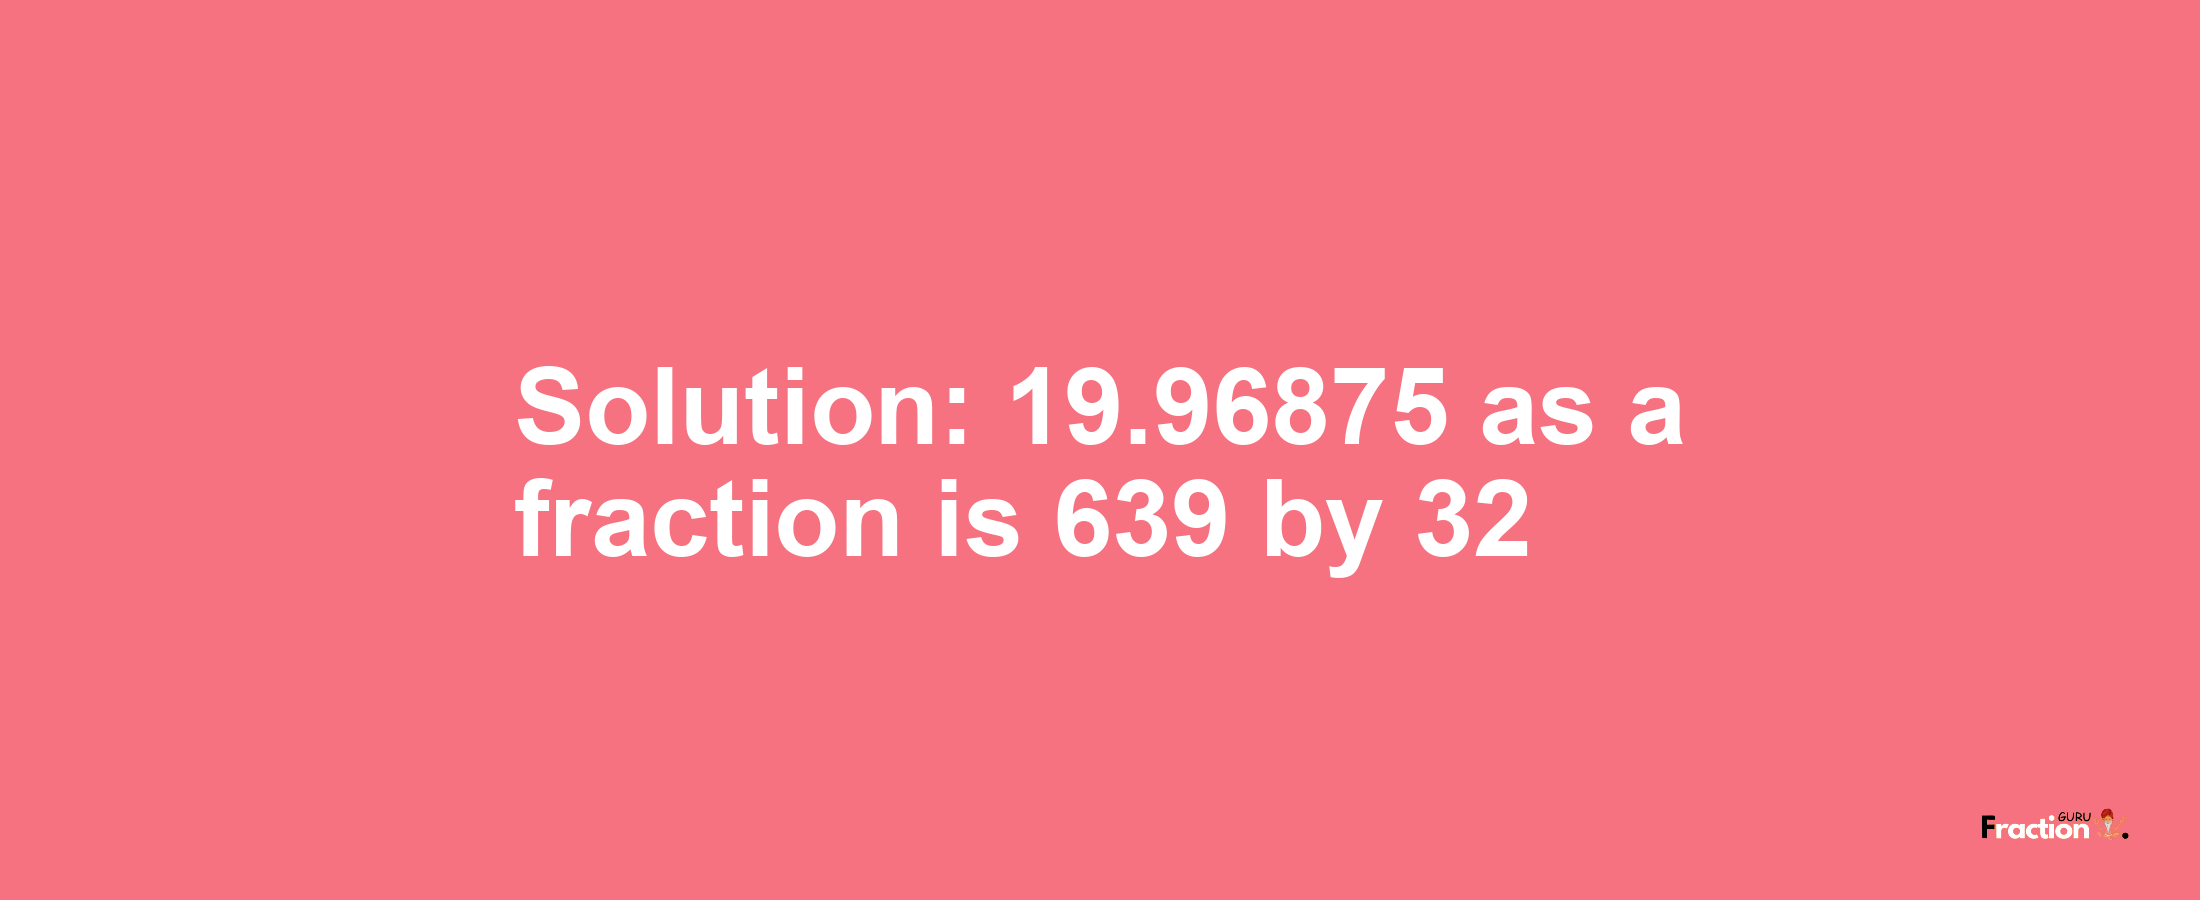 Solution:19.96875 as a fraction is 639/32